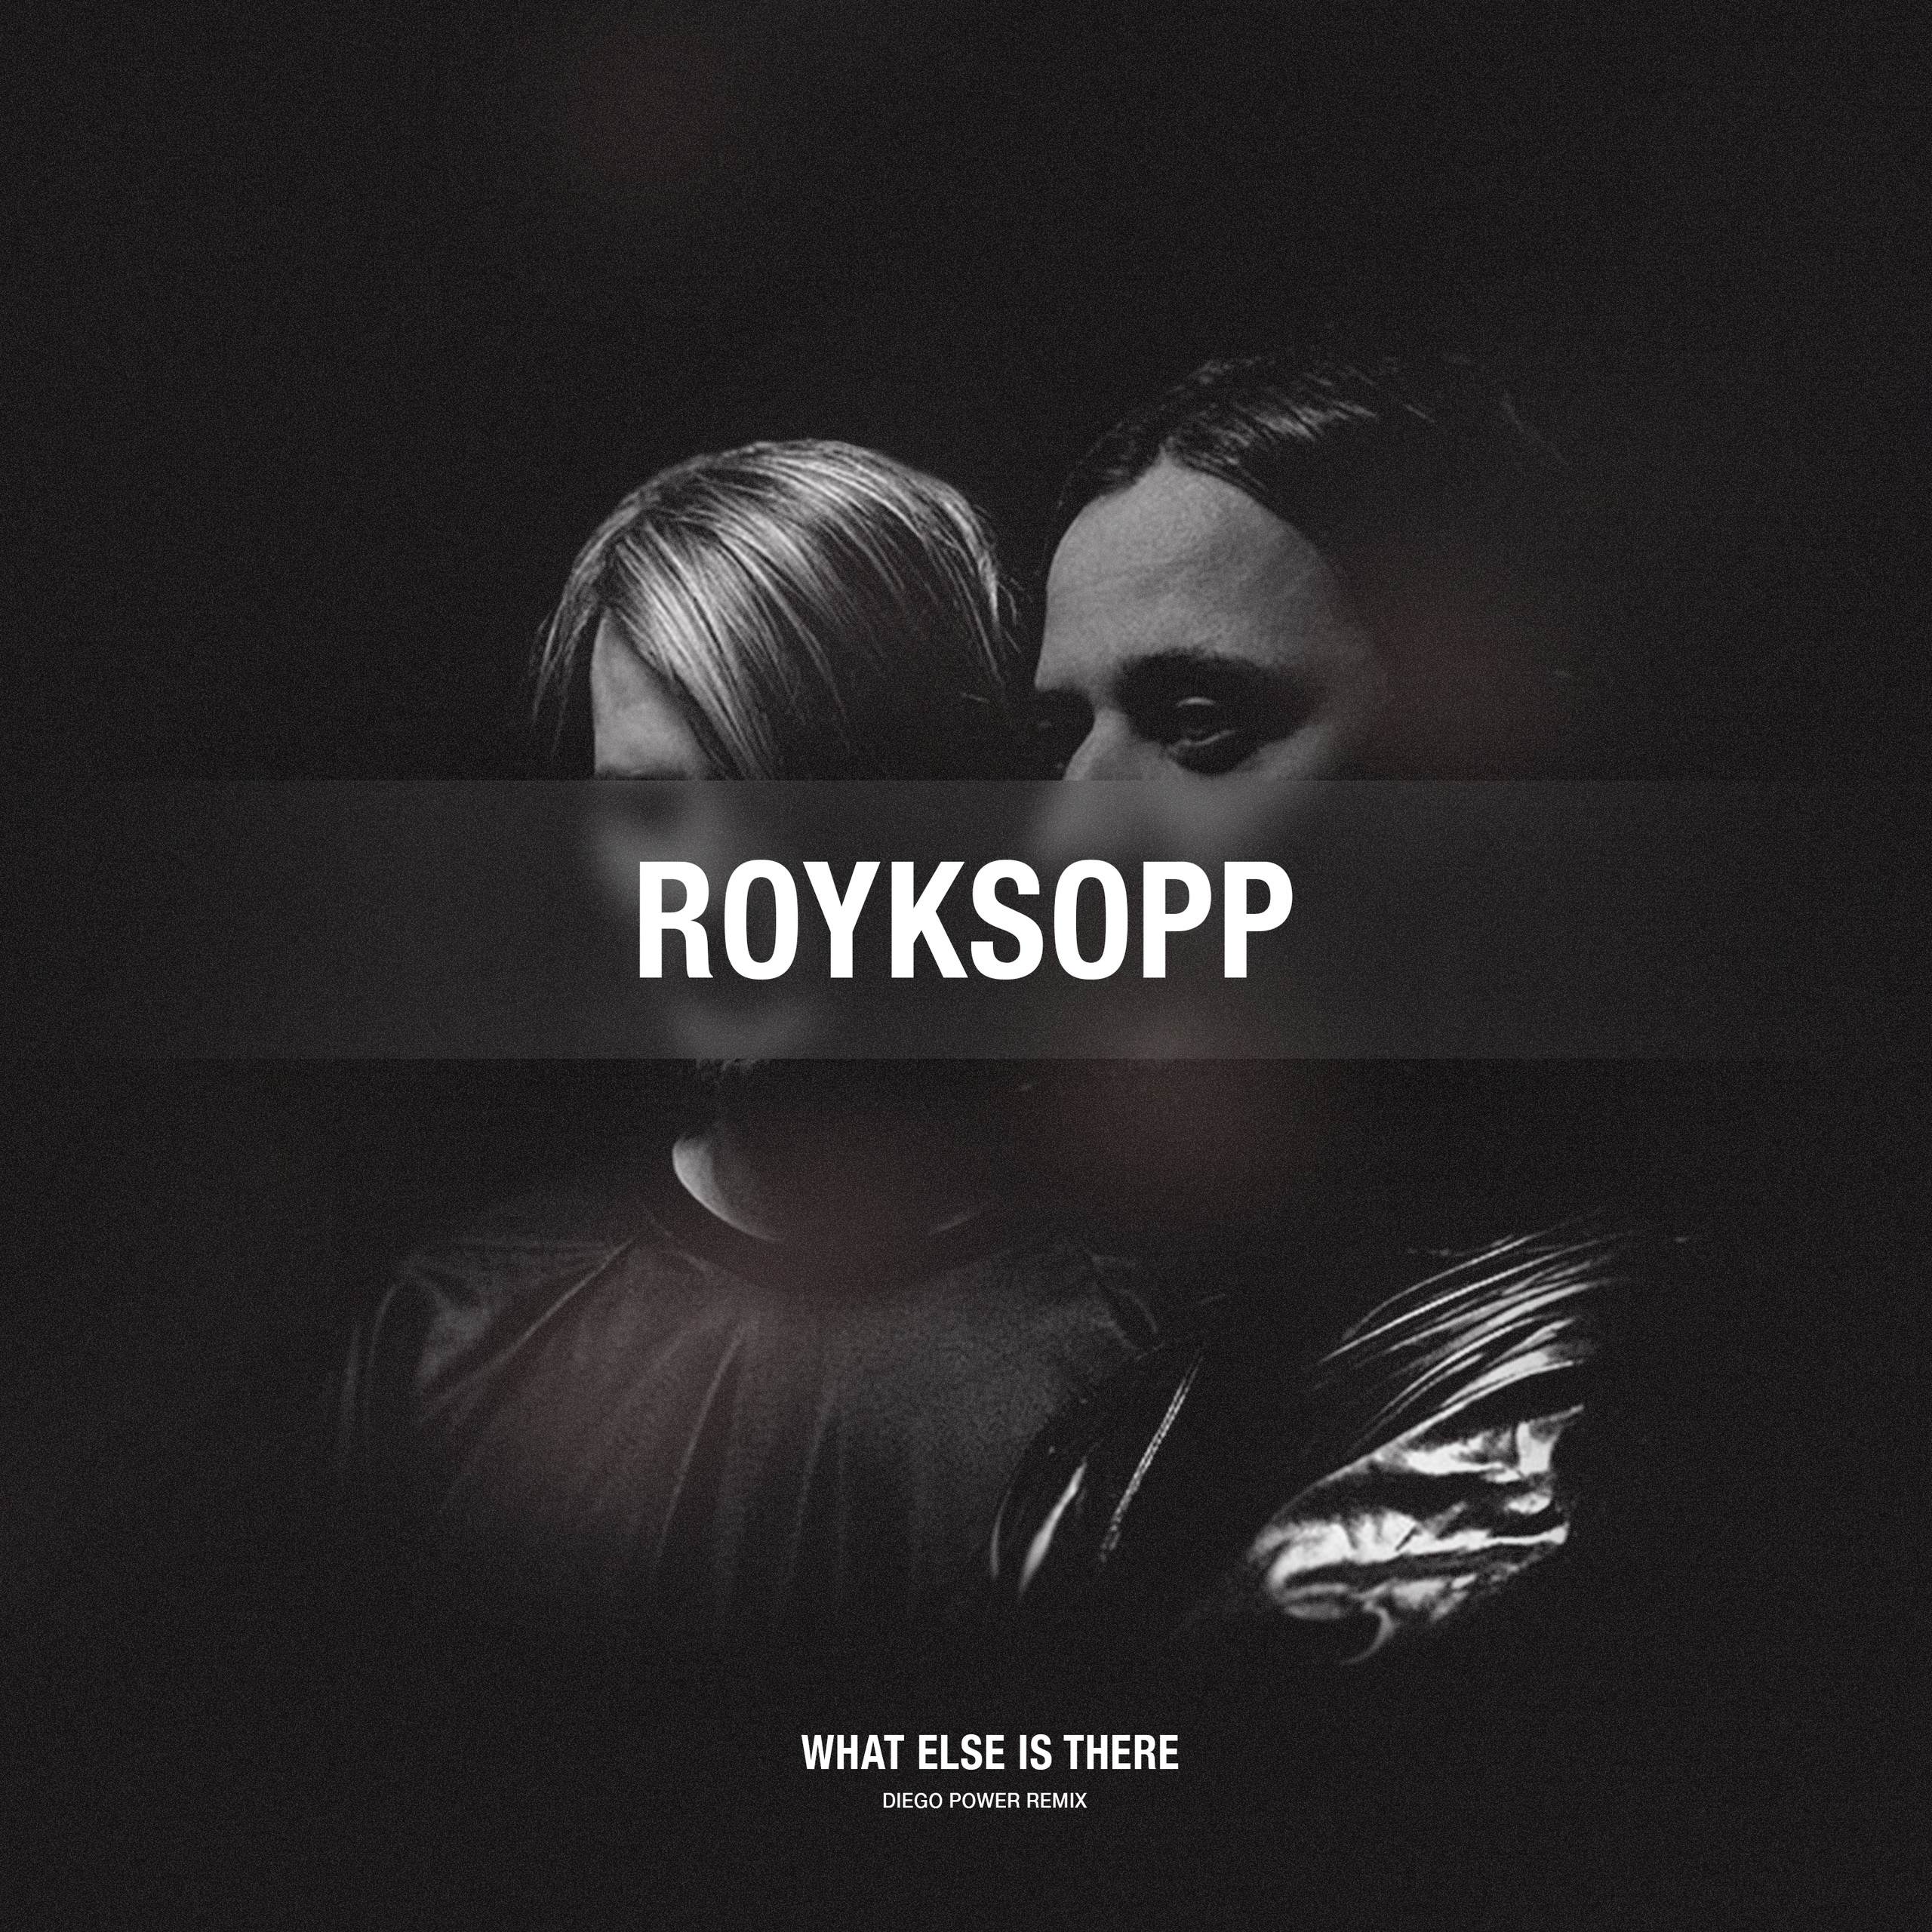 Royksopp - What Else Is There (Diego Power Remix)